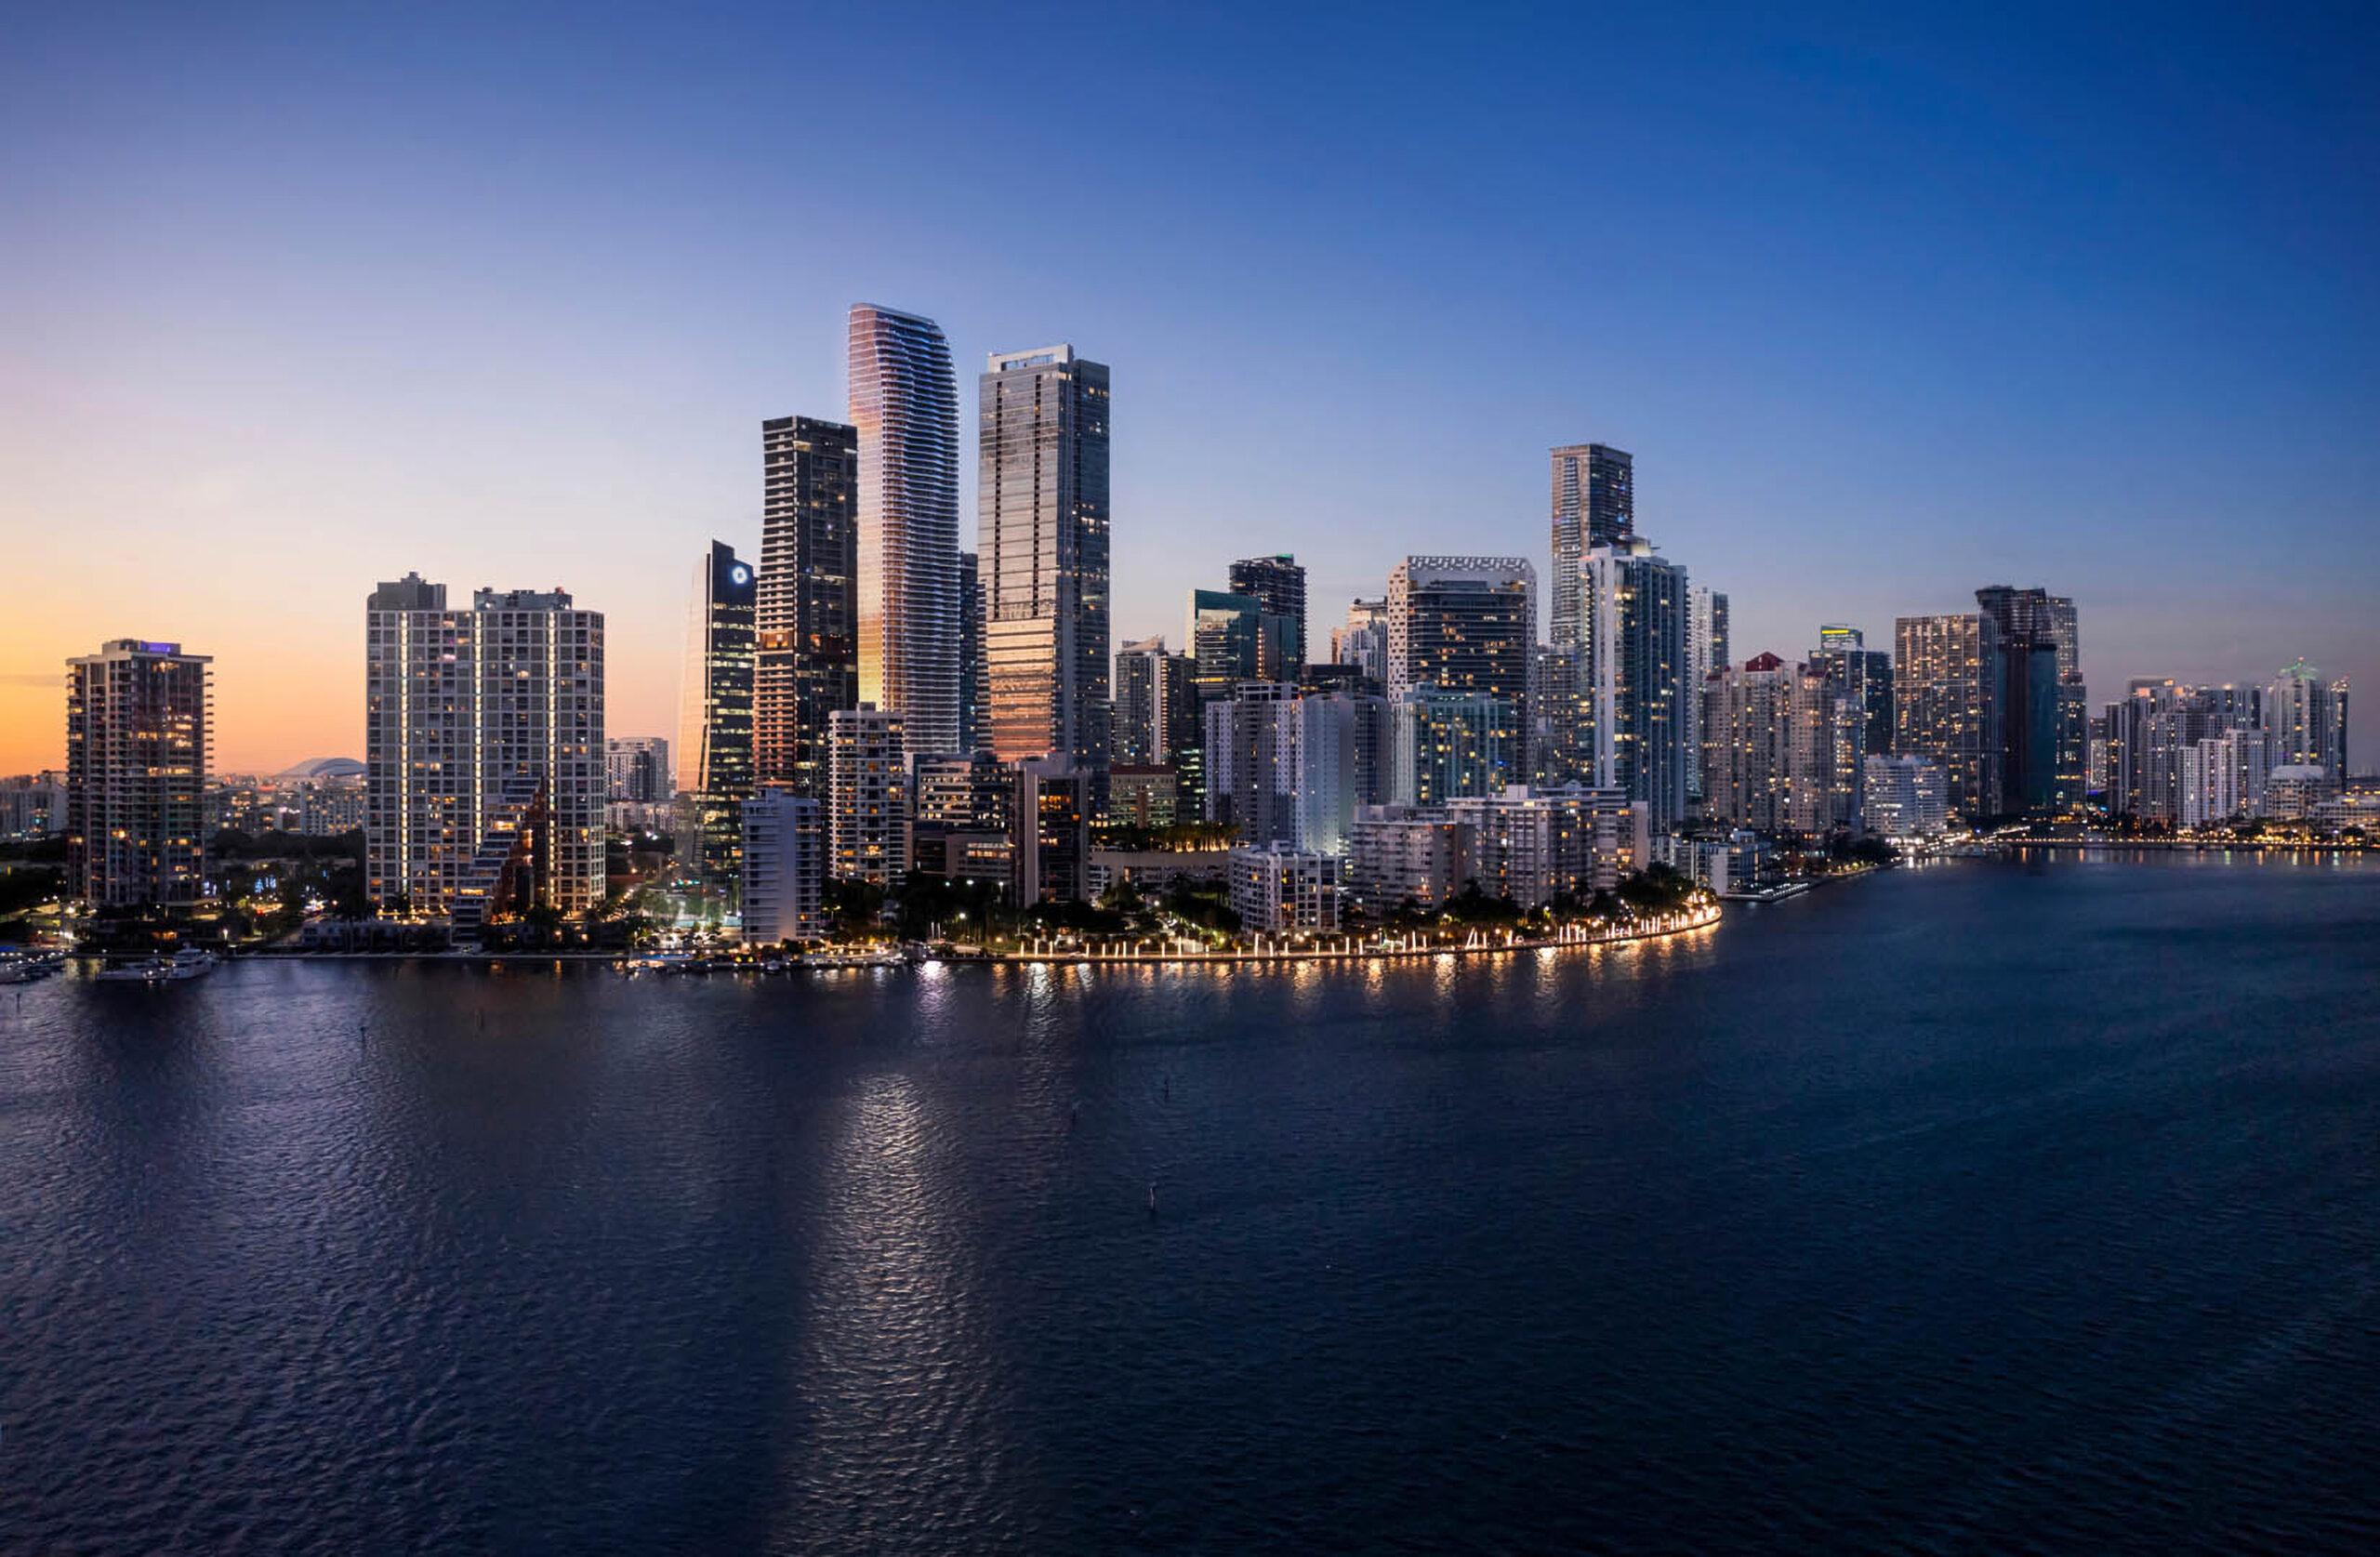 Ytech Secures $78 Million Financing for The Residences at 1428 Brickell